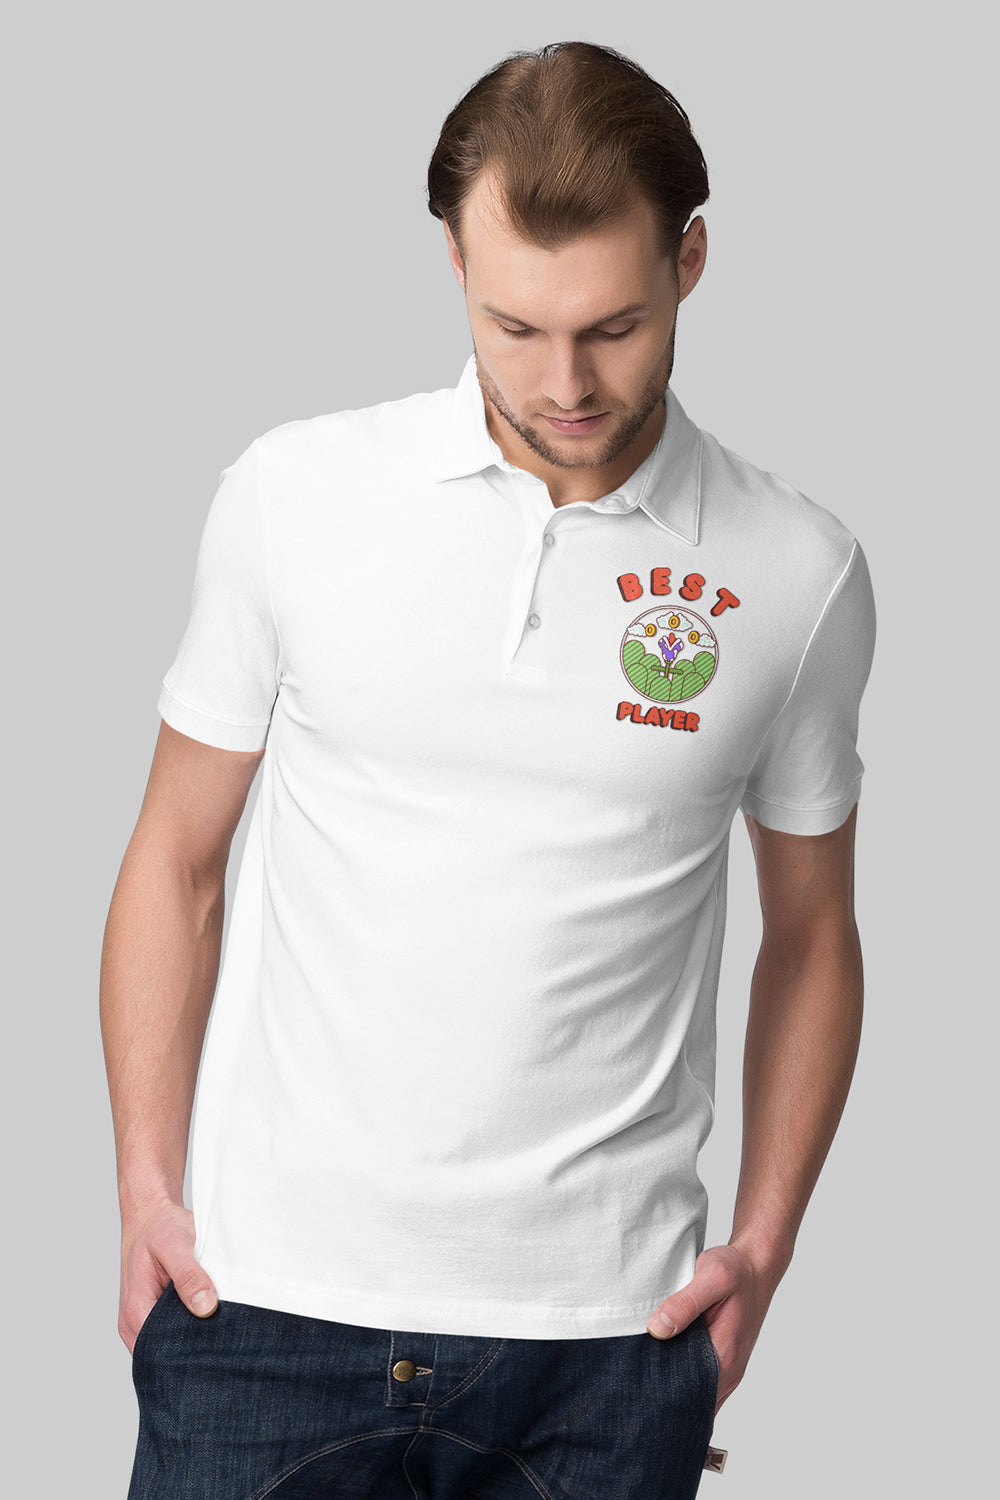 Best Player Pocket Printed White Polo Shirt